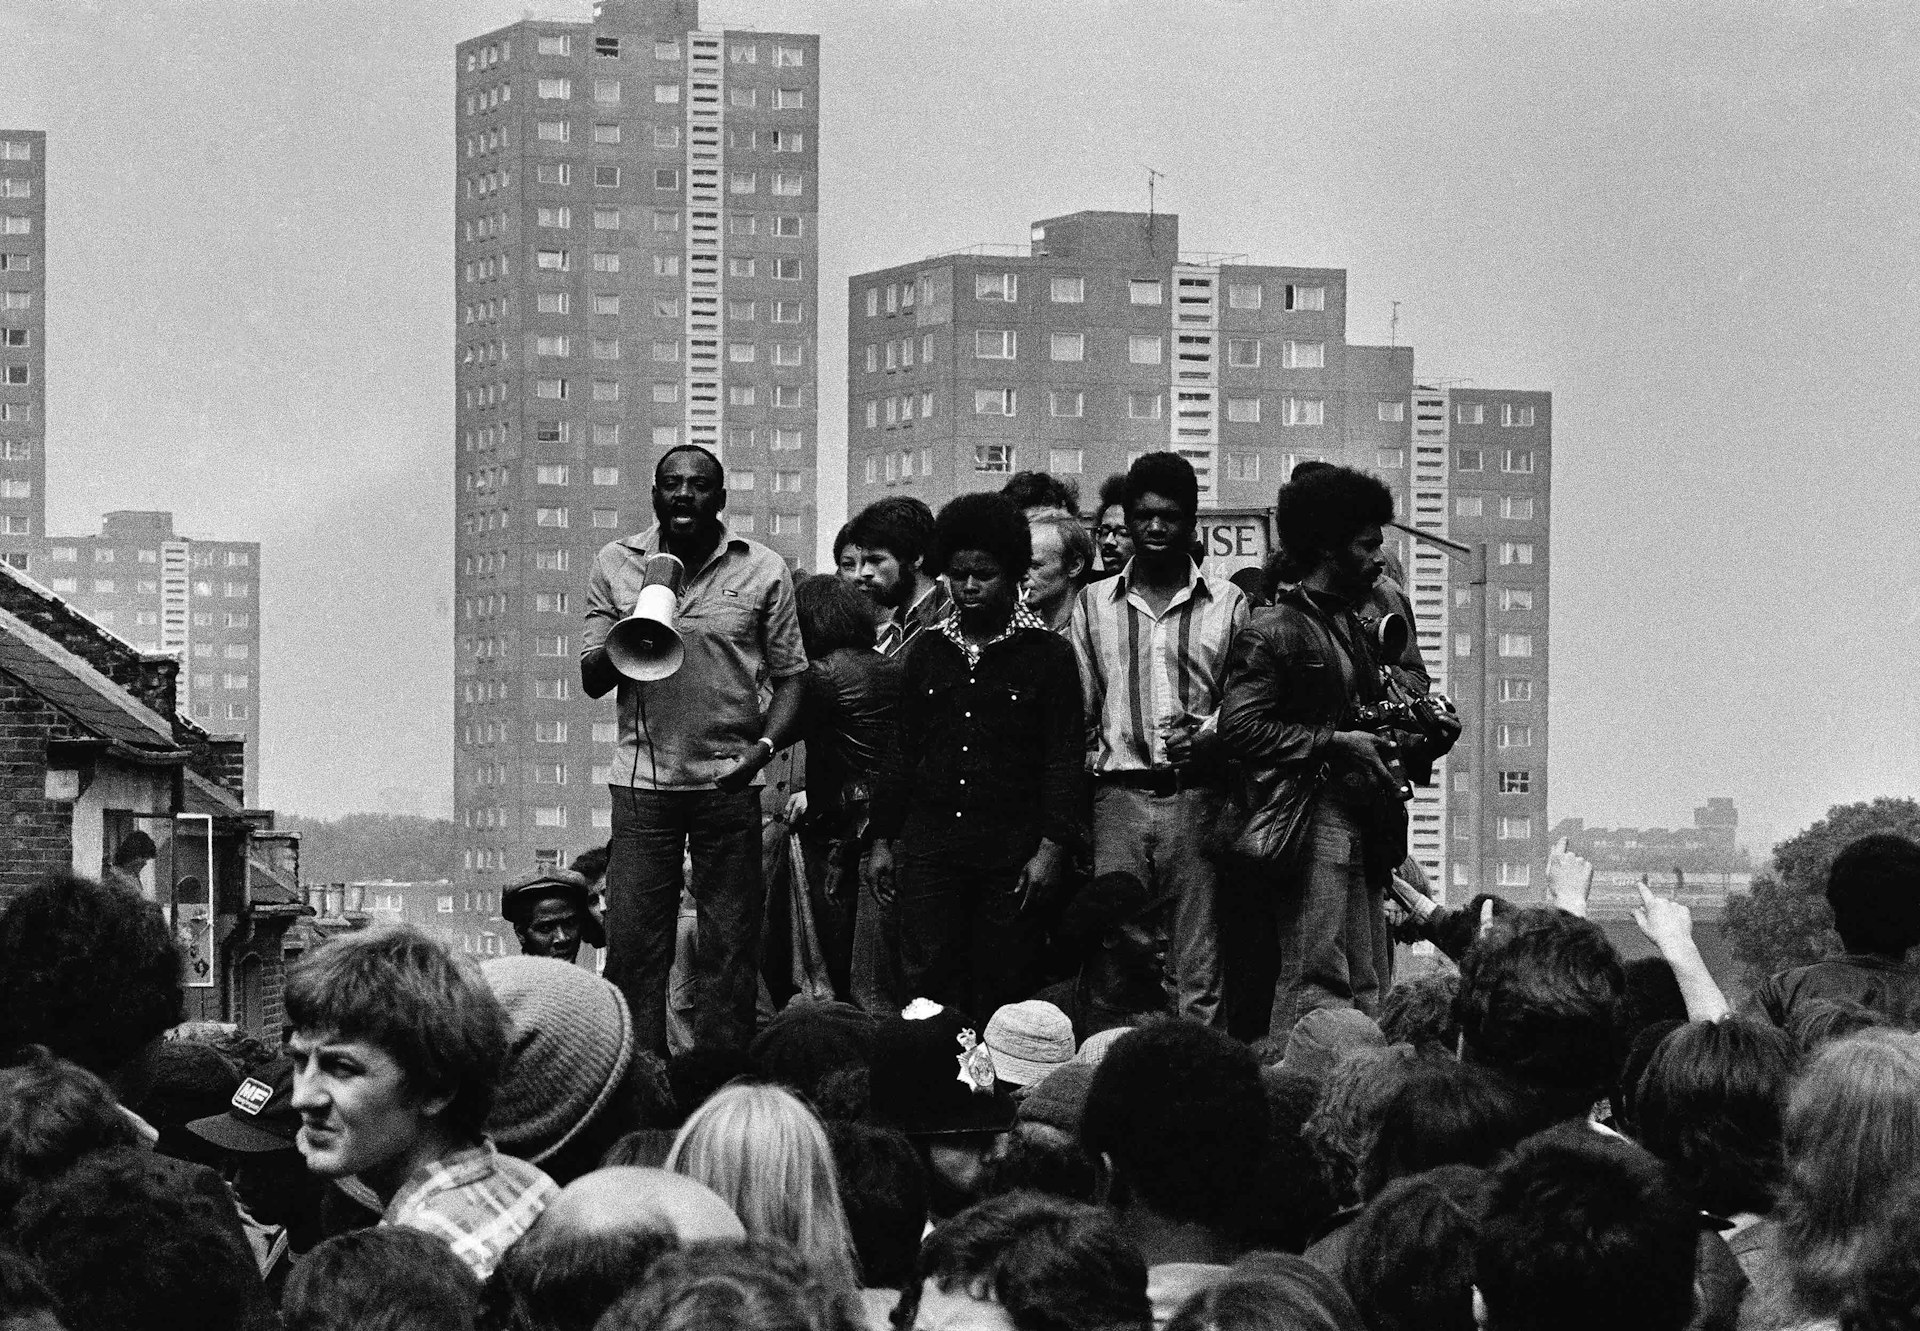 Rock, racism and rebel music: 1970s Britain through a photographer's lens